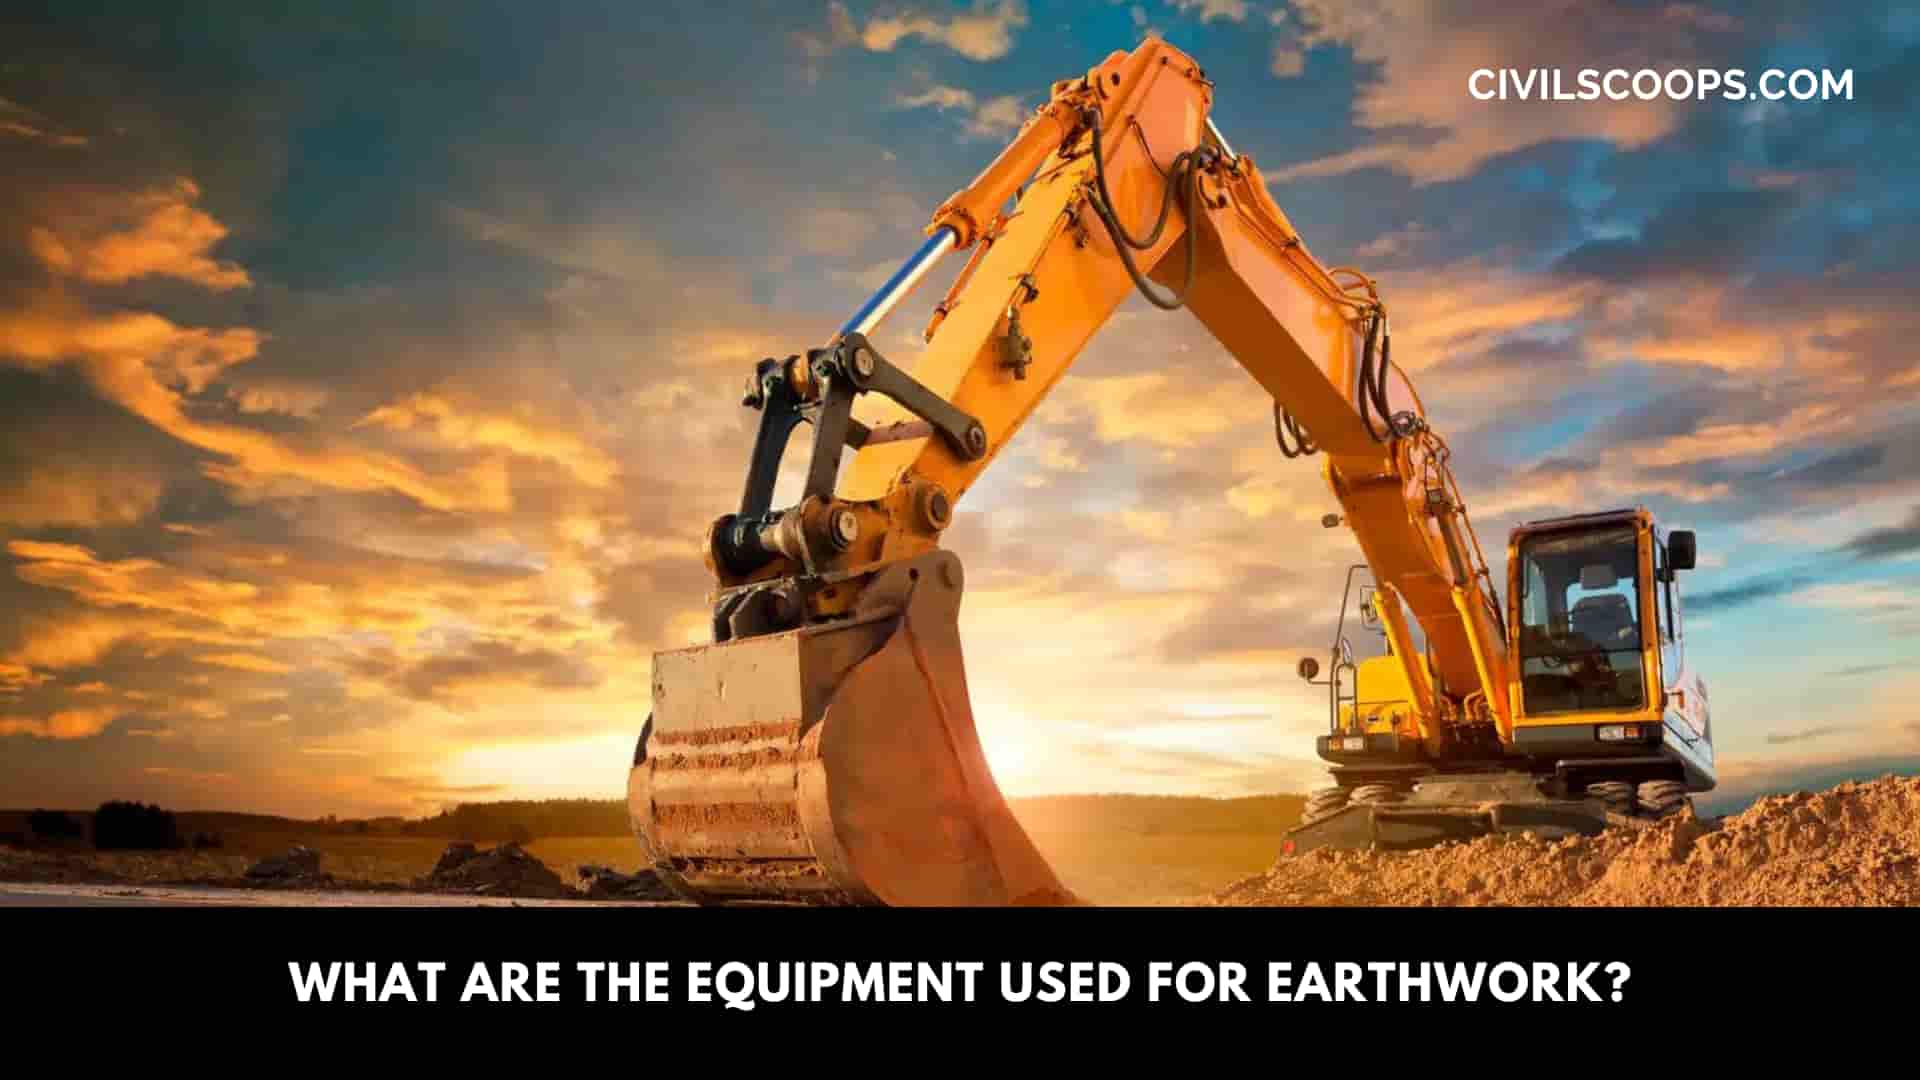 What Are the Equipment Used for Earthwork?